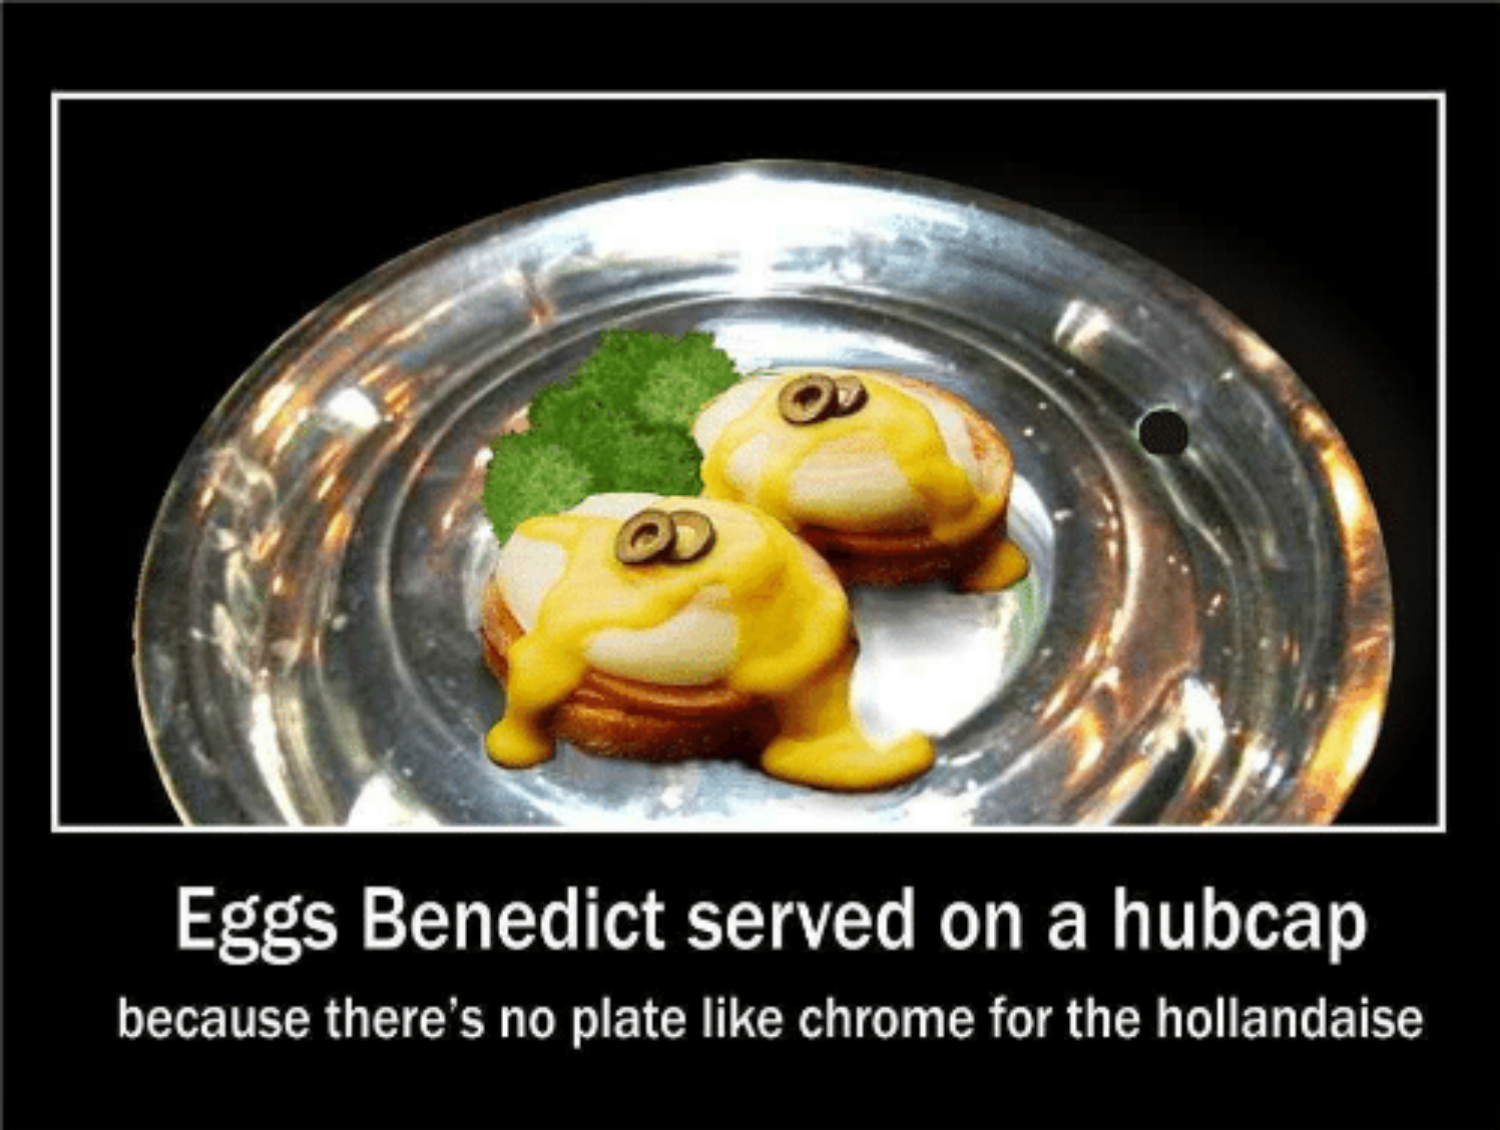 Eggs Benedict Served on a Hubcap because there is no plate like chrome for the hollandaise.